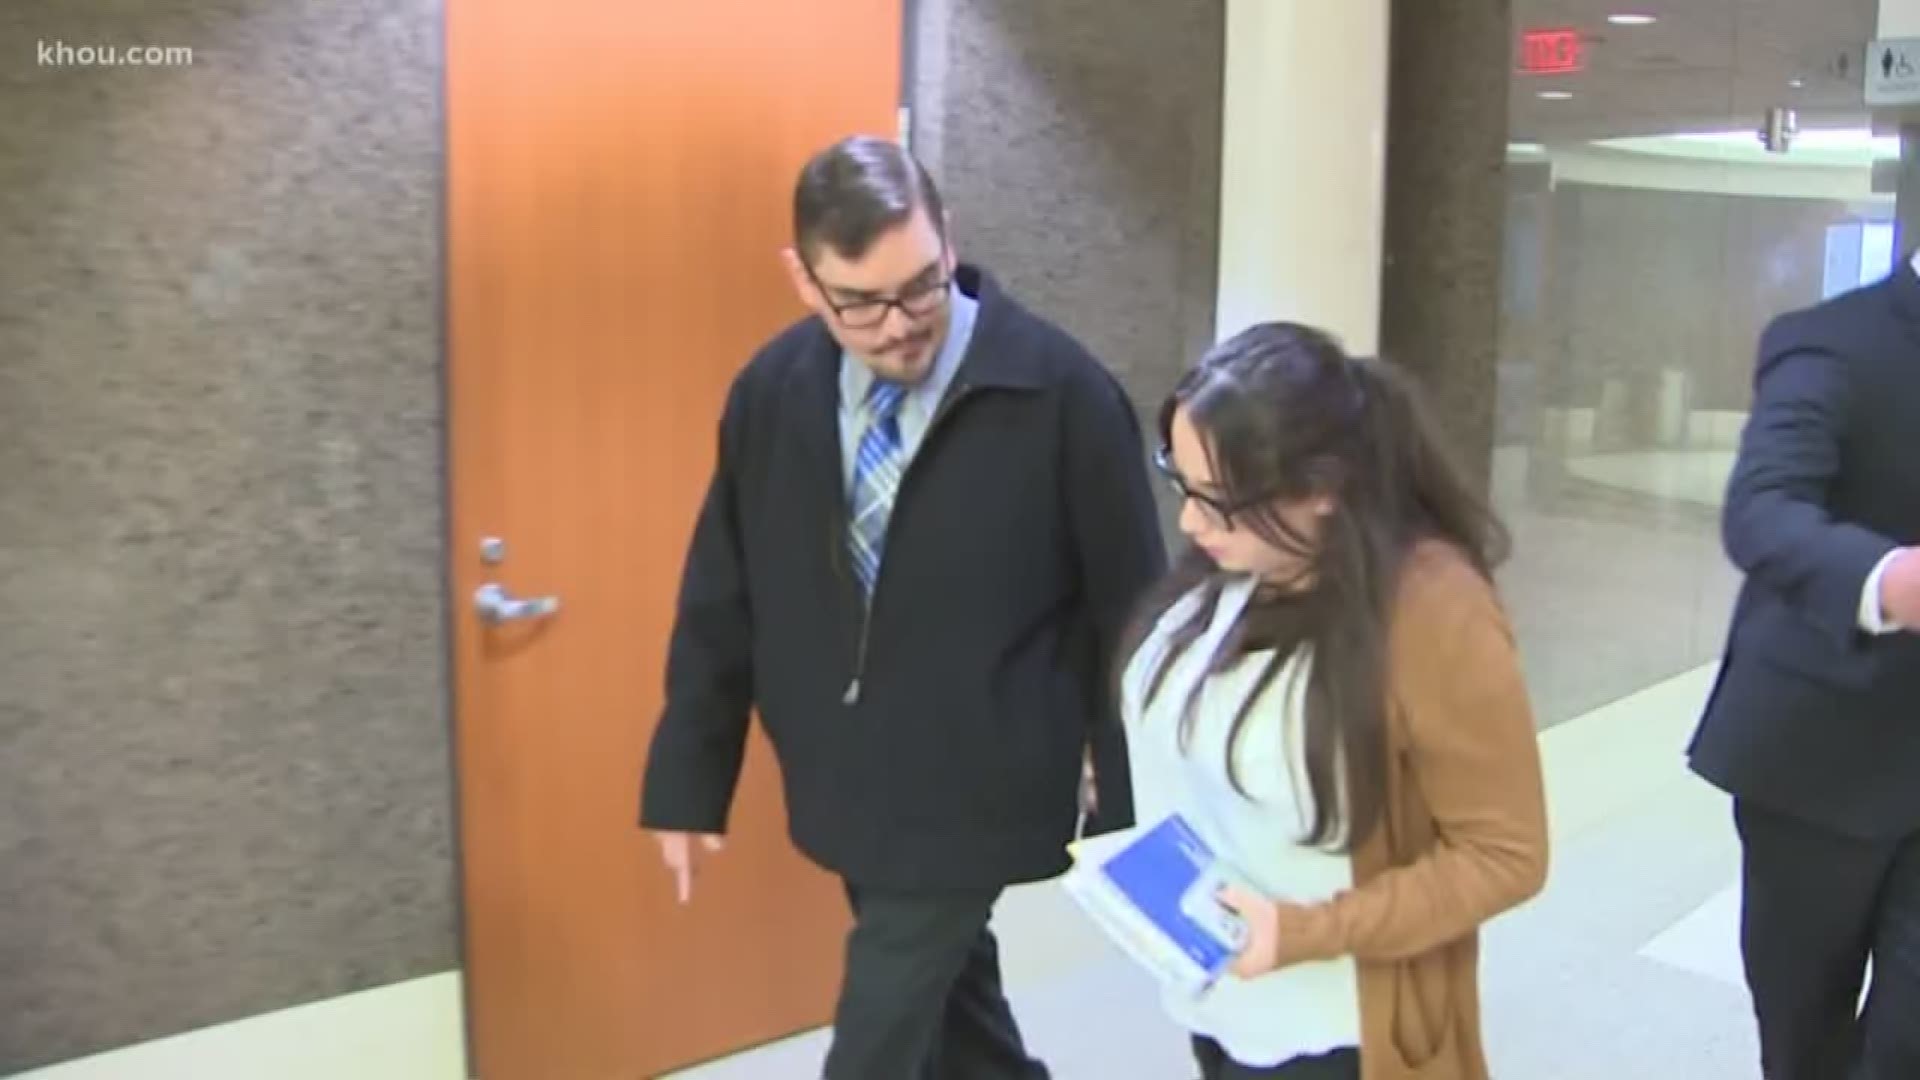 James Alan Bradley, an HISD teacher accused of touching a student inappropriately, made his first court appearance Wednesday.